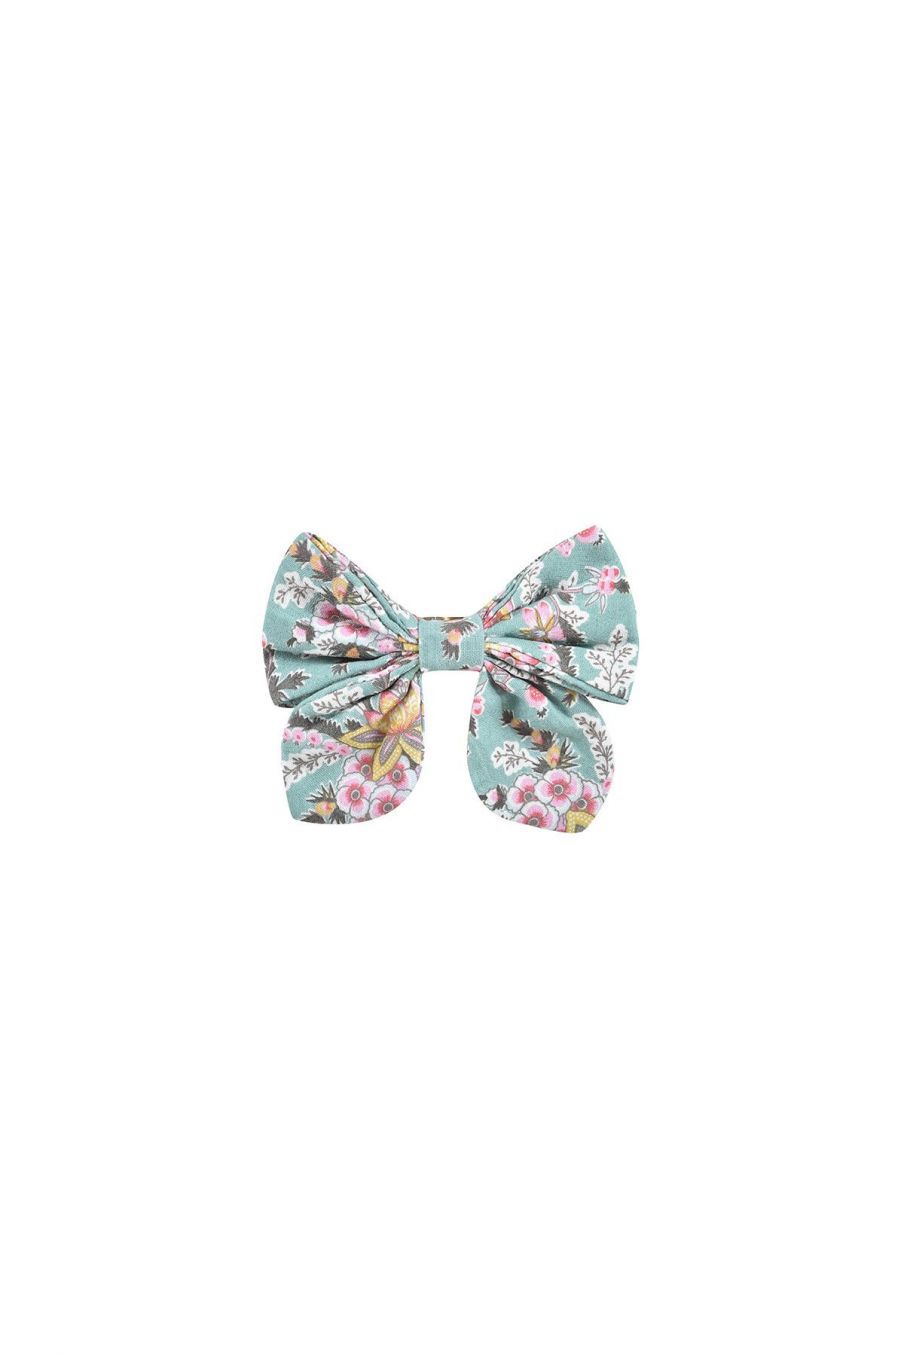 barrette fille lisa blue french flowers - louise misha